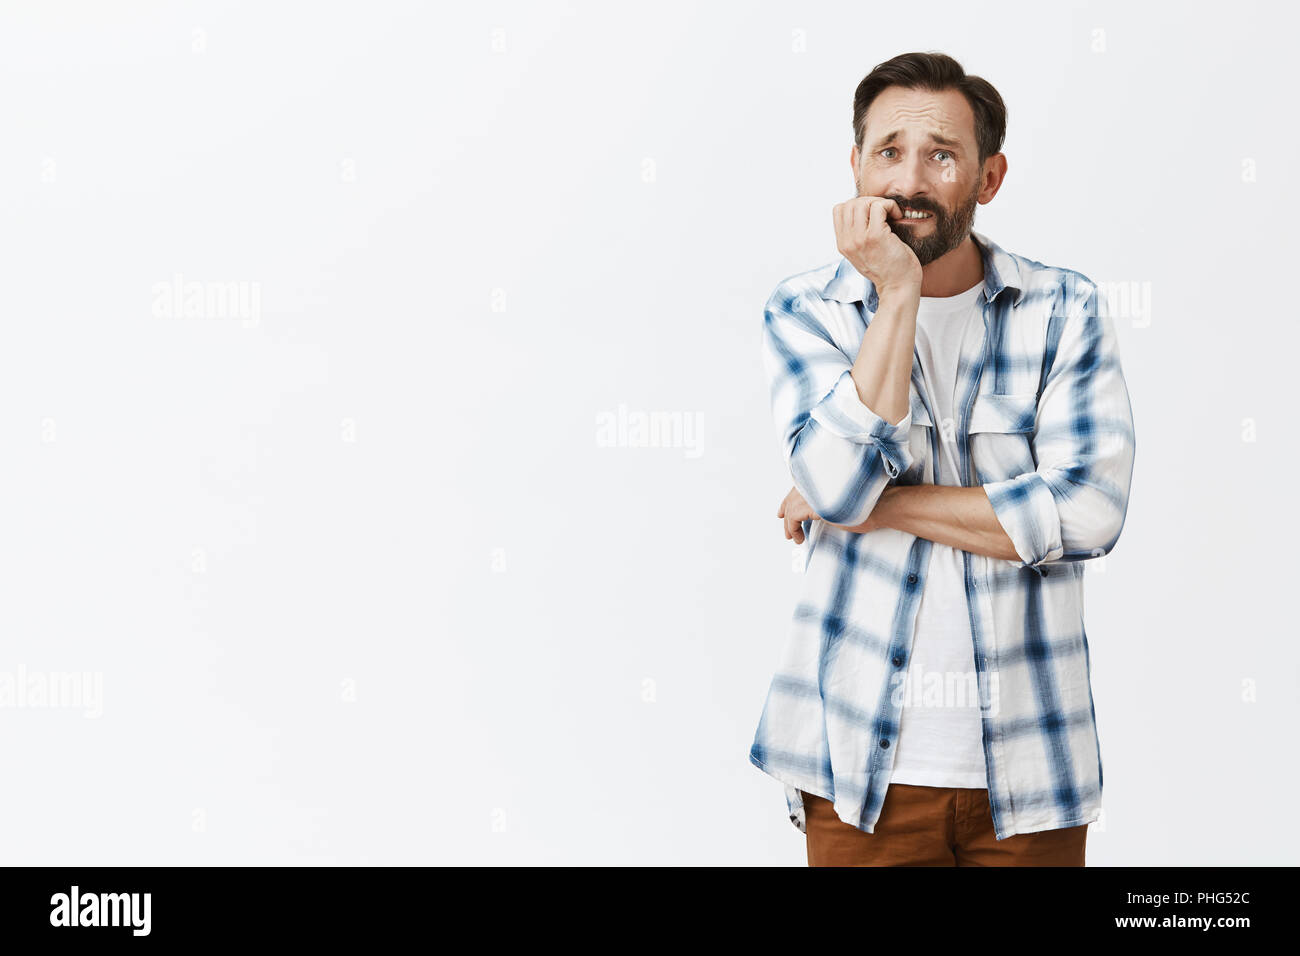 Man trying quiet smoking, biting fingernails while feeling need to smoke, frowning and gazing with sad expression aside, thinking, trying to control feelings, standing over gray background anxious Stock Photo